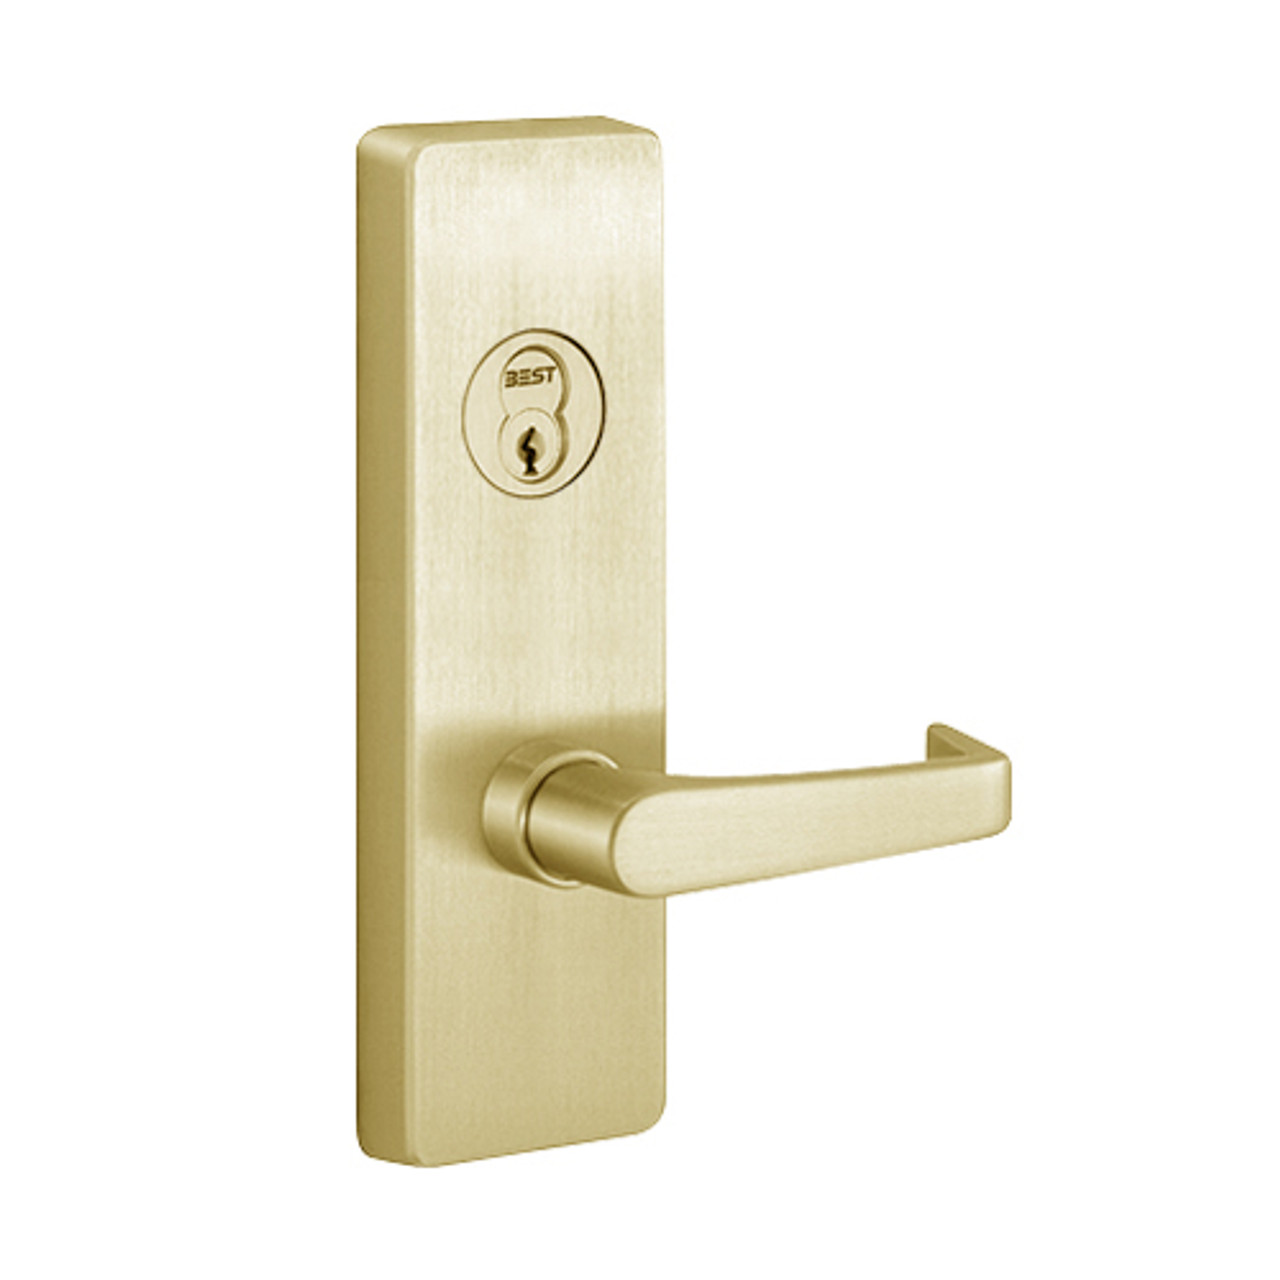 4903A-605-LHR PHI Key Retracts Latchbolt Trim with A Lever Design for Apex and Olympian Series Exit Device in Bright Brass Finish